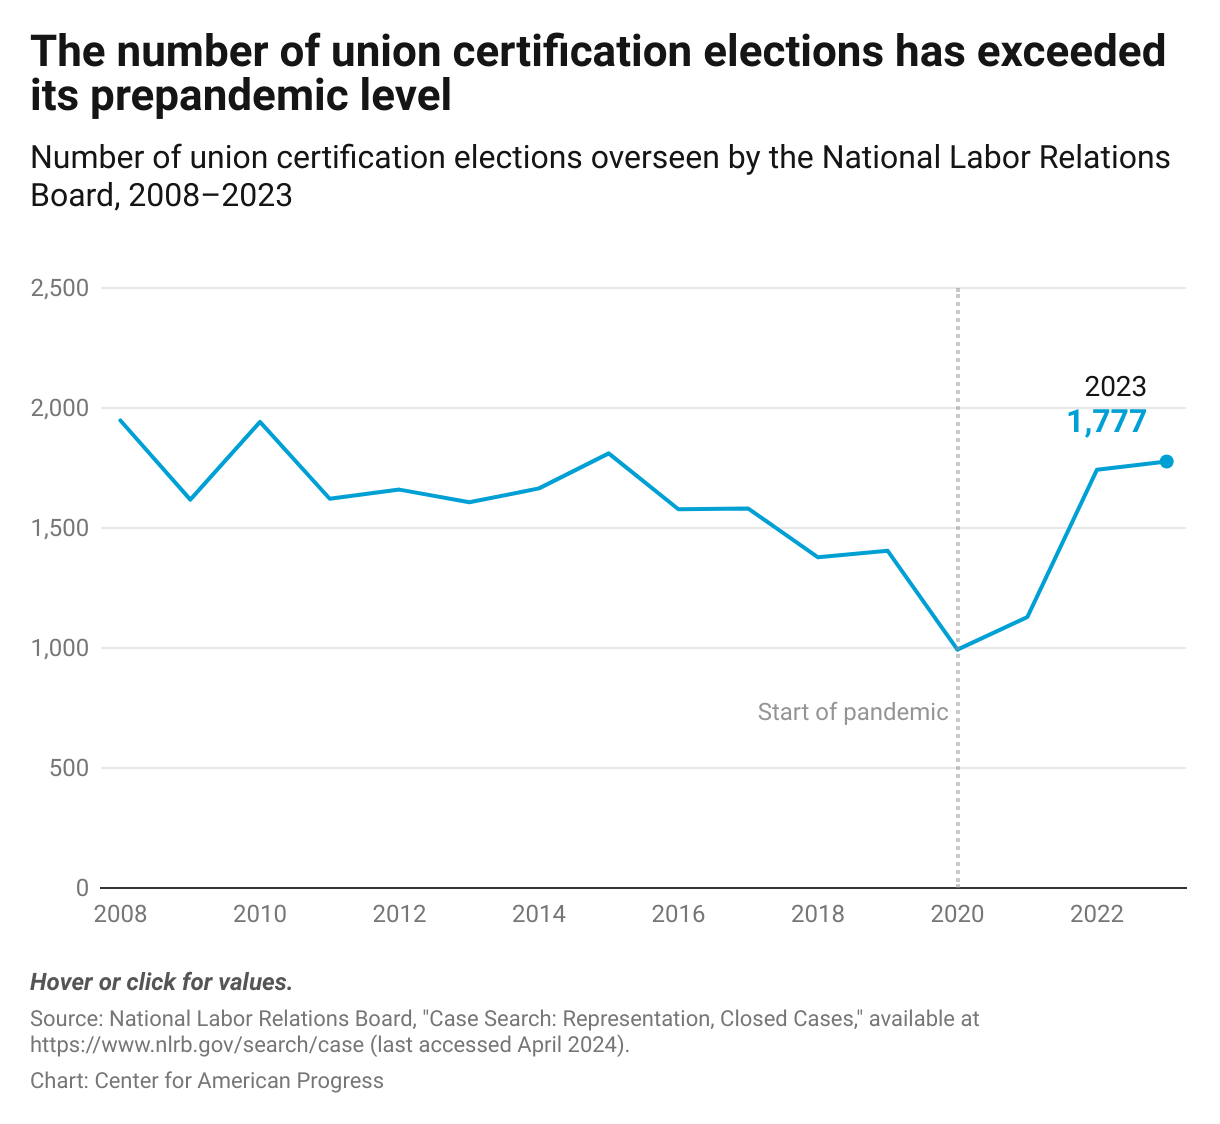 Line chart showing that the number of union elections decreased from 2017 to 2020 but increased to 1,777 in 2023.